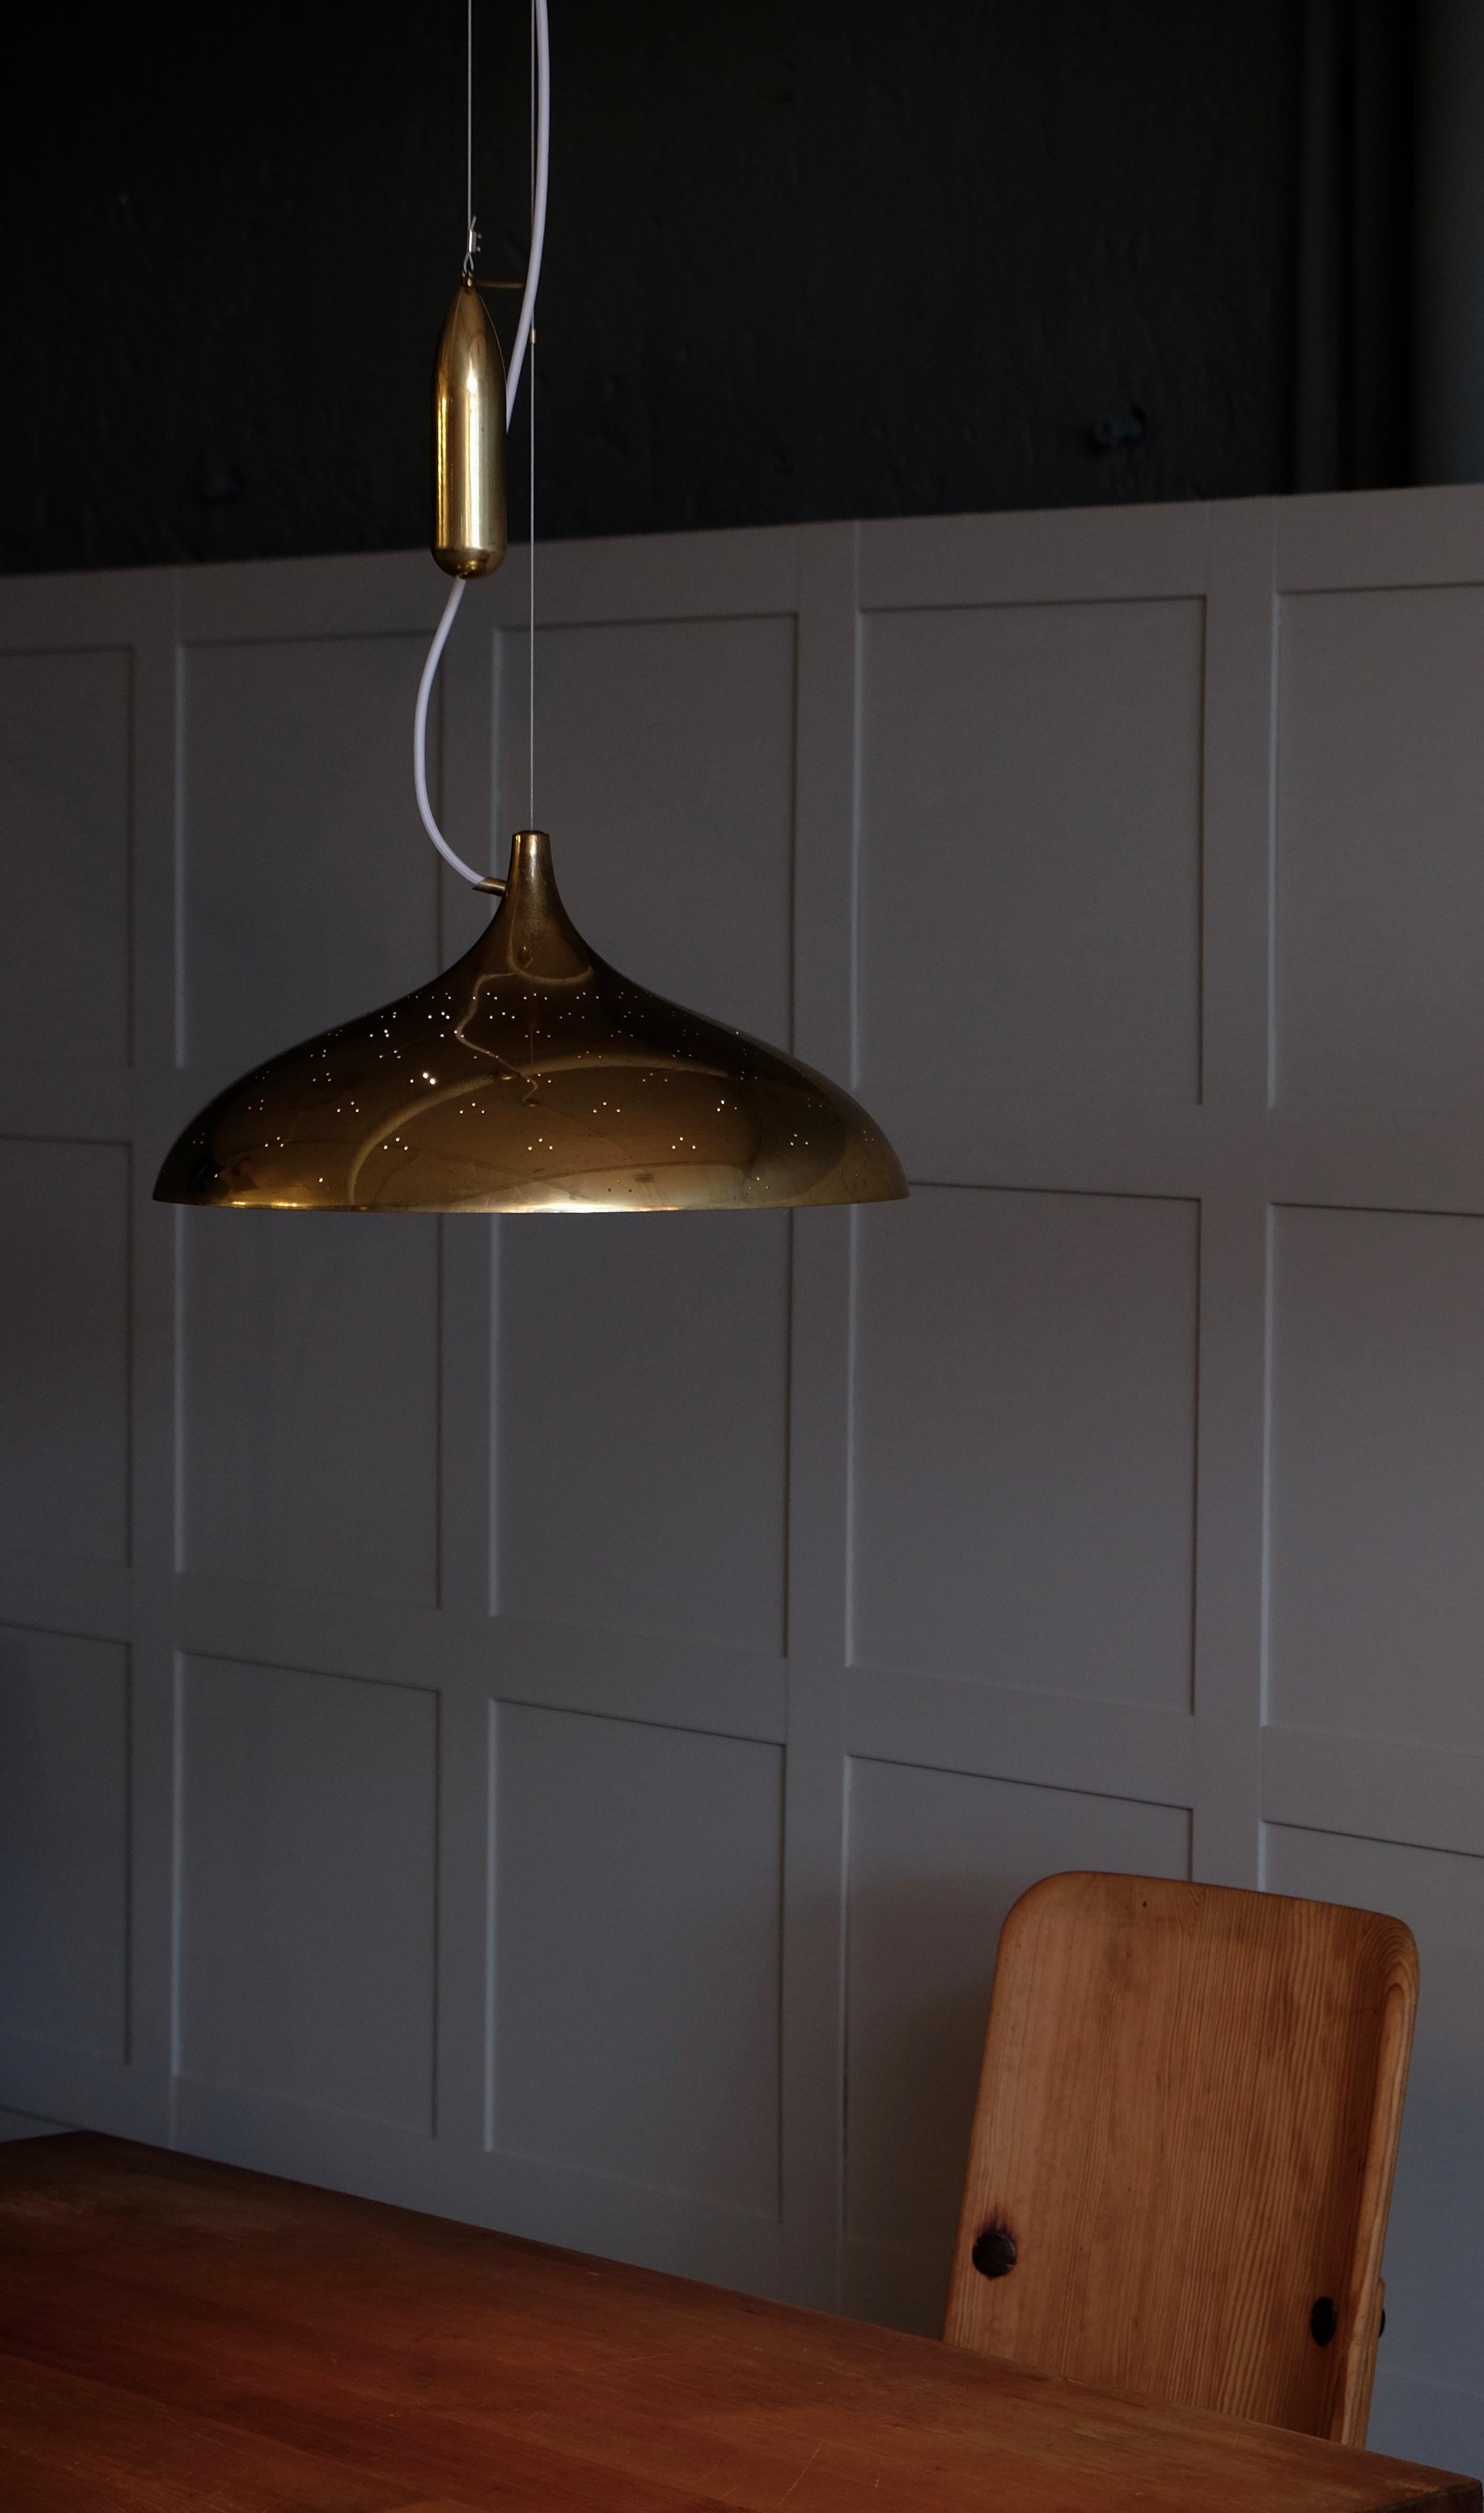 Paavo Tynell counter weight pendant in brass with perforated shade, paper diffuser with brass finial at center. The overall length is completely adjustable. Manufactured by Taito Oy. New wiring.
Finland, circa 1950s.